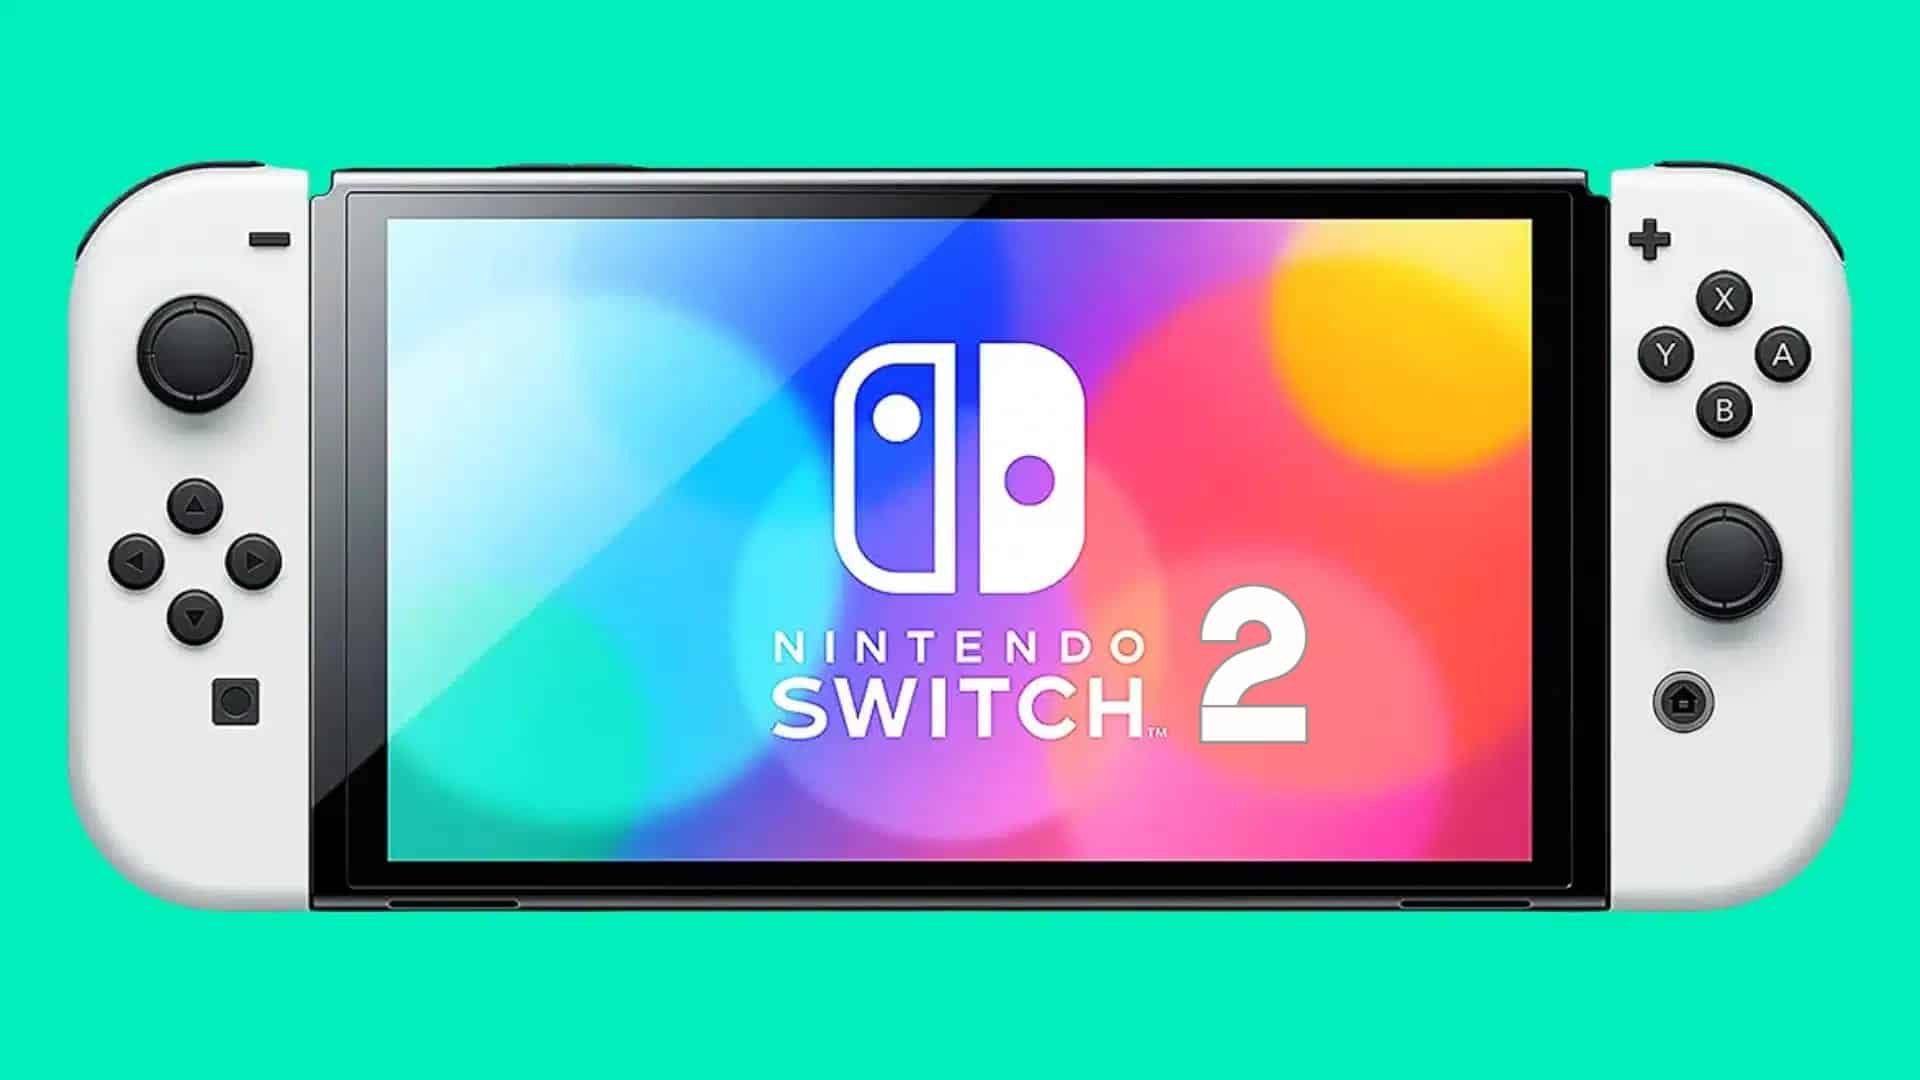 Peripheral Maker Leaks Nintendo Switch 2 Info; States Backwards Compatibility With Games and Controllers